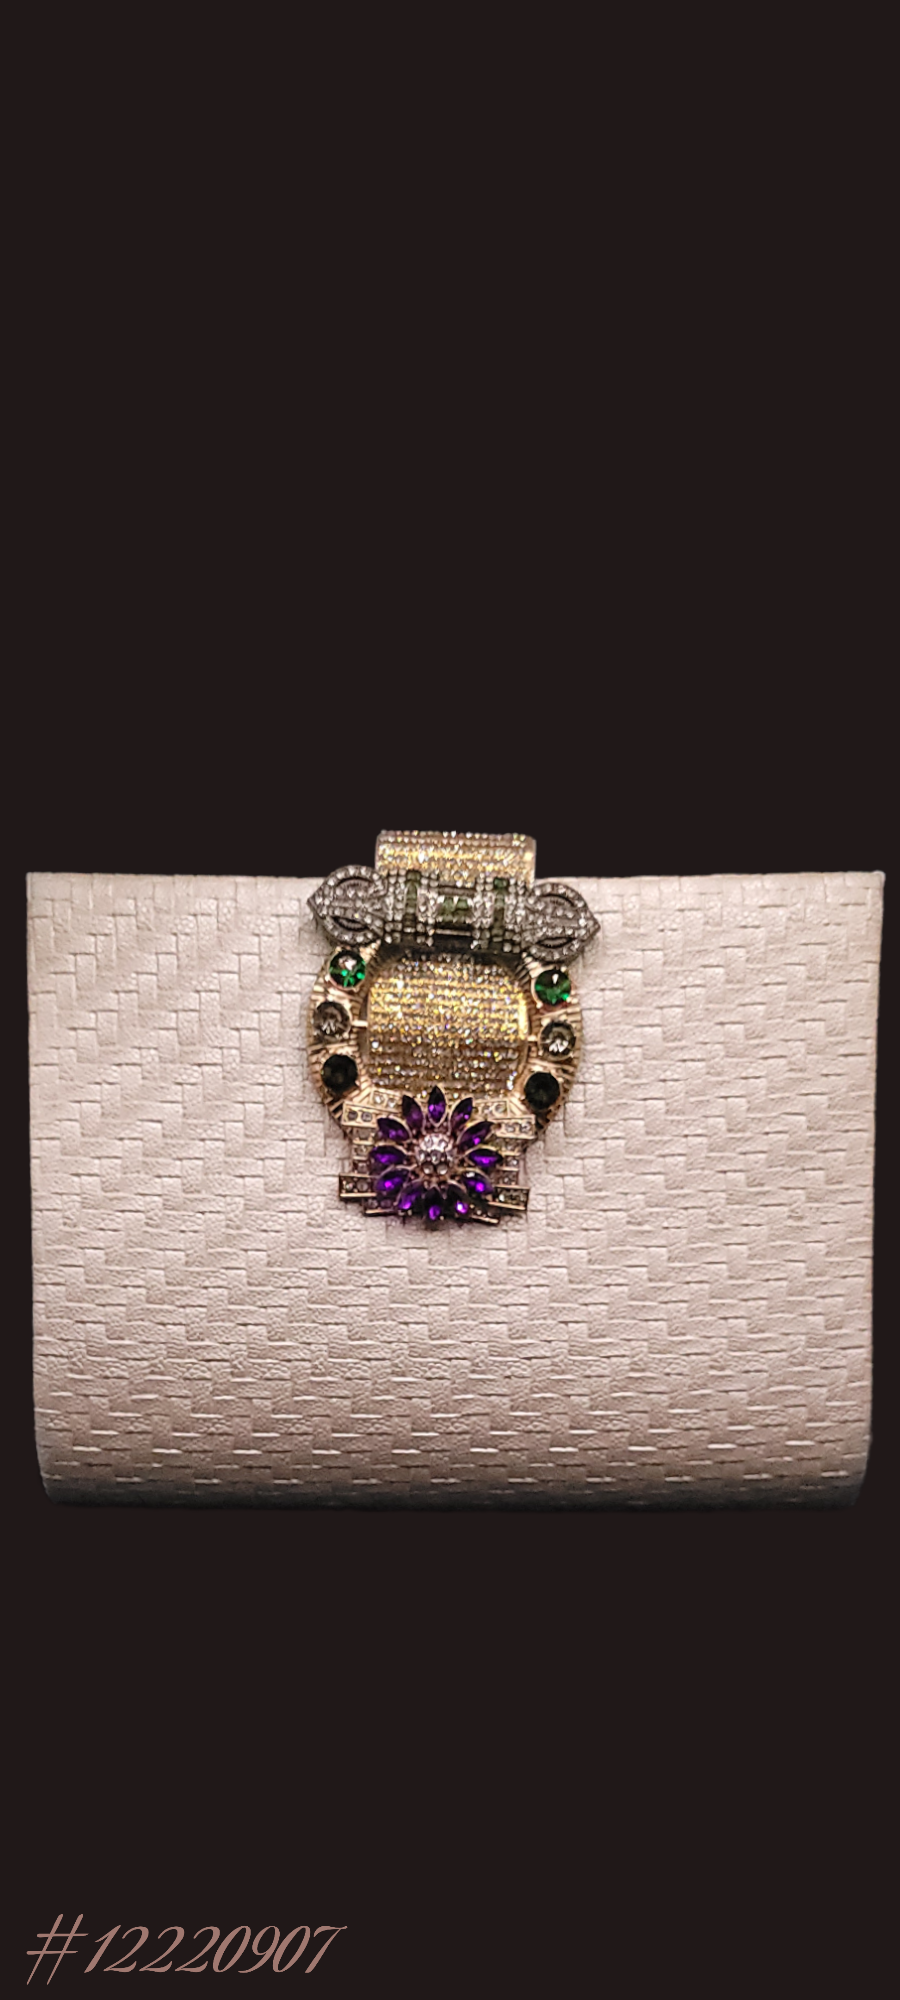 PRECIOUS DESIGNER BAG IN PEAR COLOR WITH GOLD DIAMONDS AND COLORFUL STONES